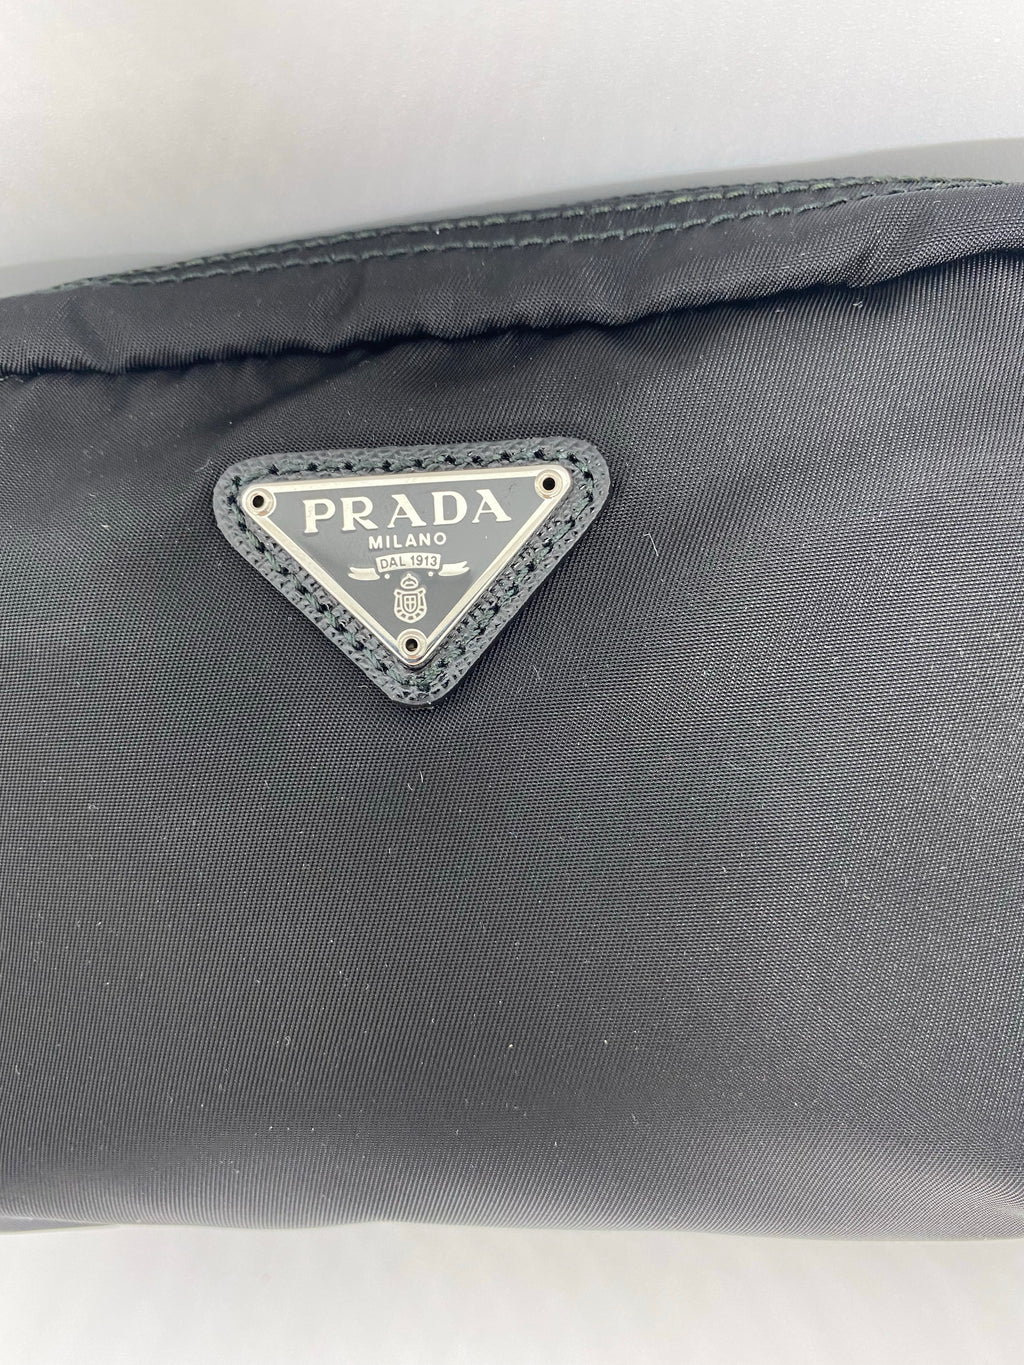 Like New Prada Cosmetic Pouch Small